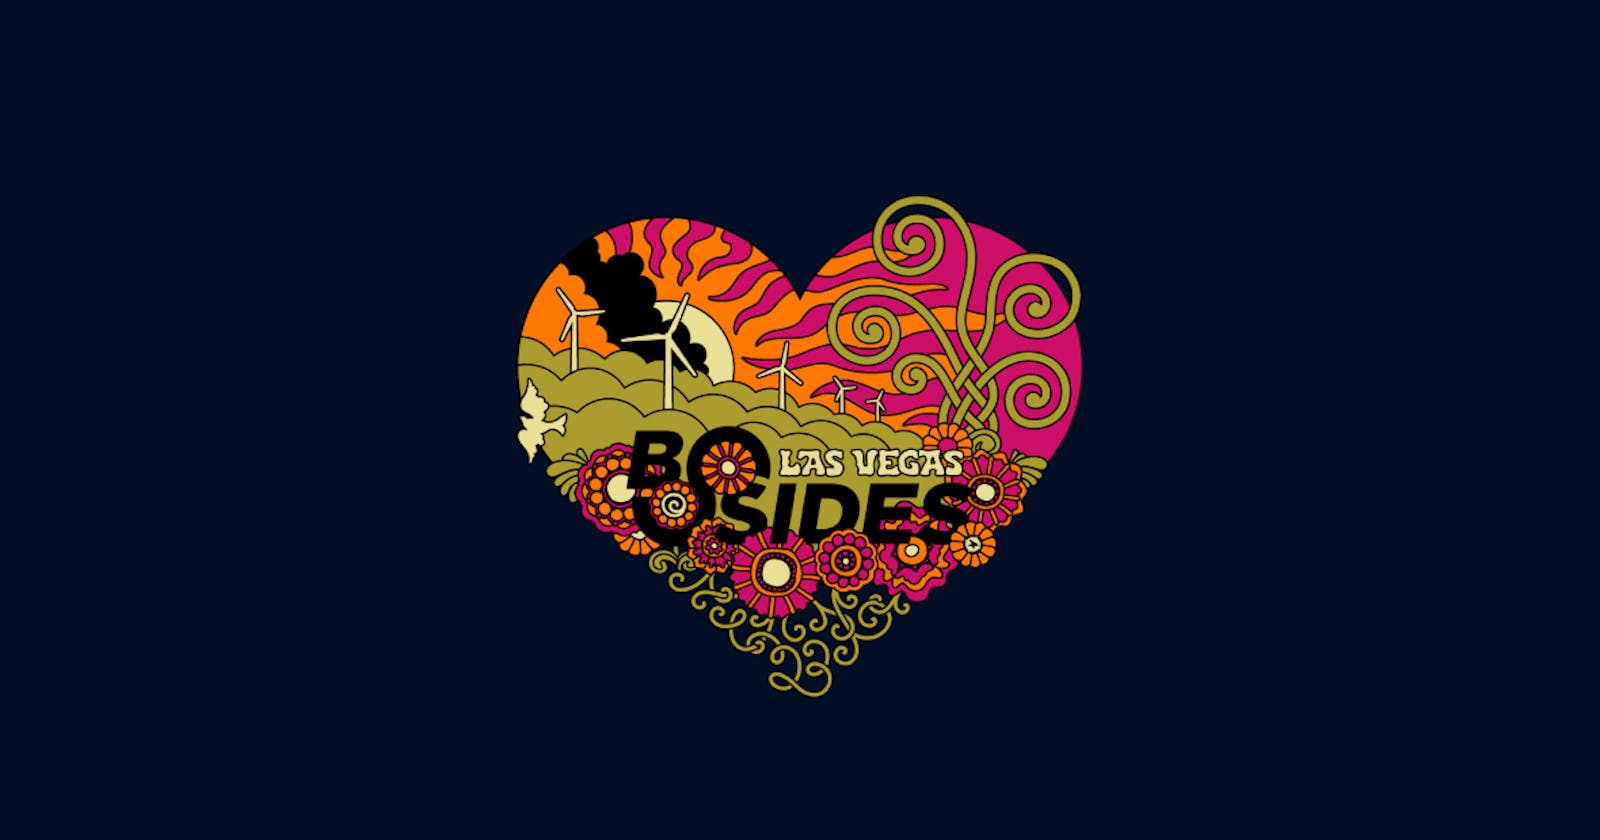 BSidesLV: The big event before the biggest security event in Las Vegas